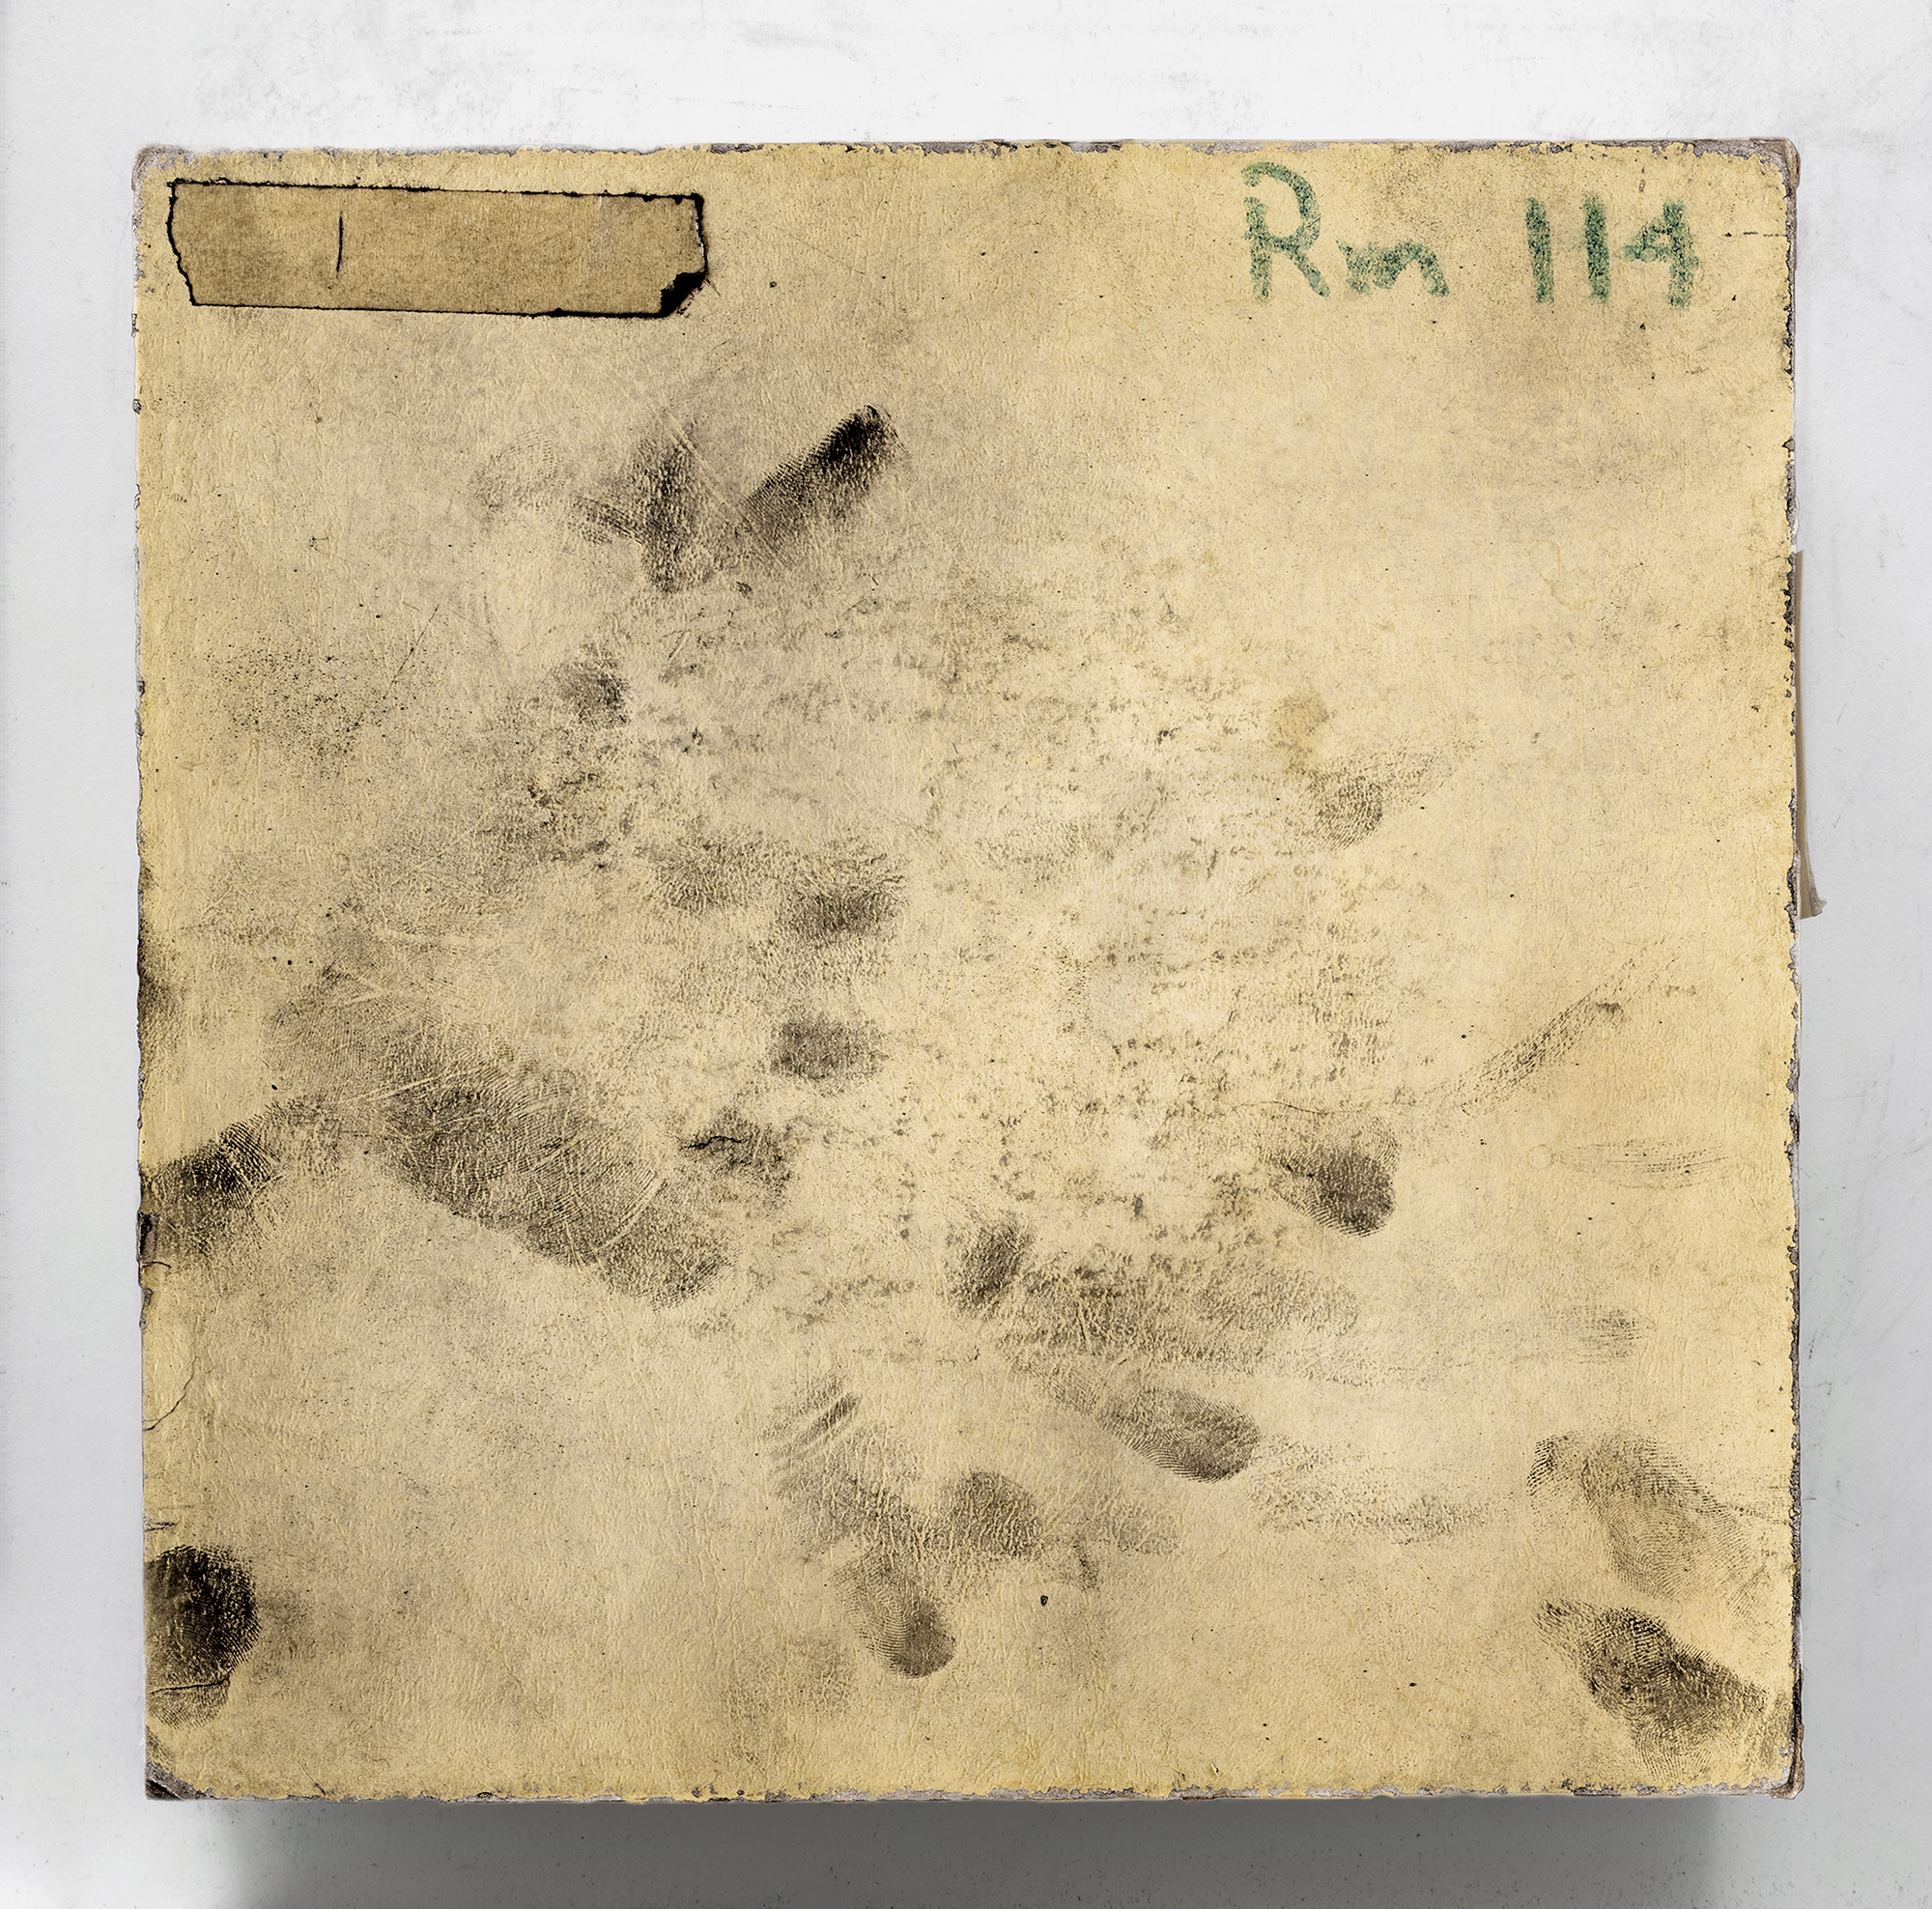 Buff-colored piece of paper covered with smudged black fingerprints. In the upper left corner is a piece of adhesive tape; in the upper rights, in green crayon, are the words "Rm 114" 